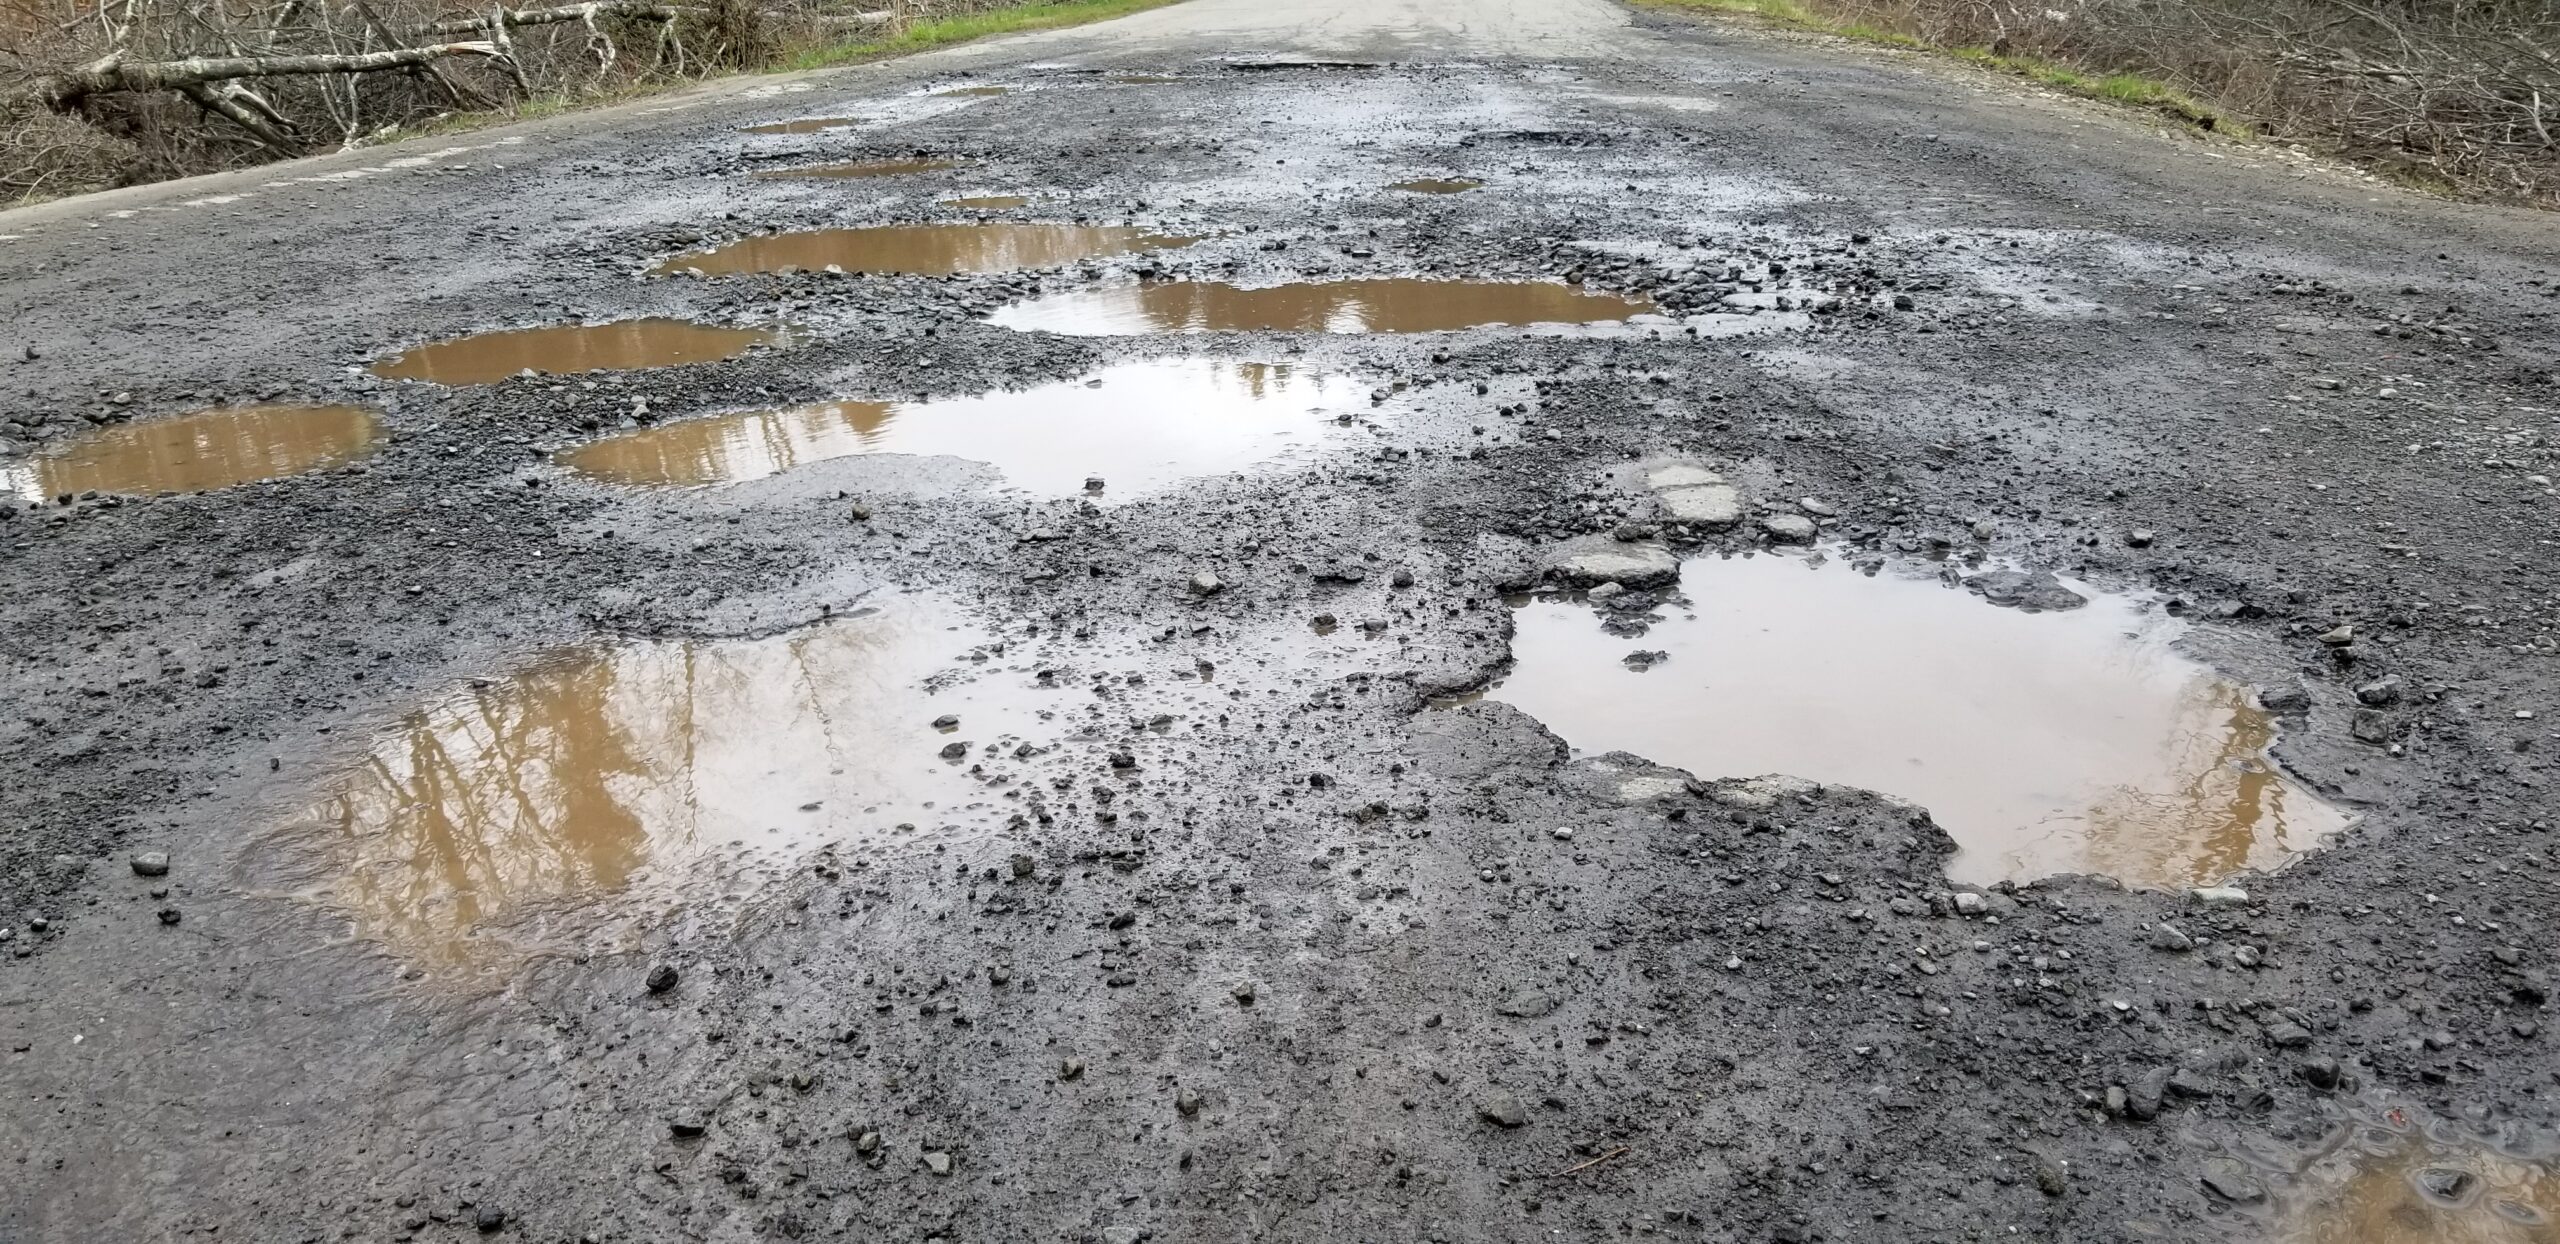 Puddles and potholes on a gravel road